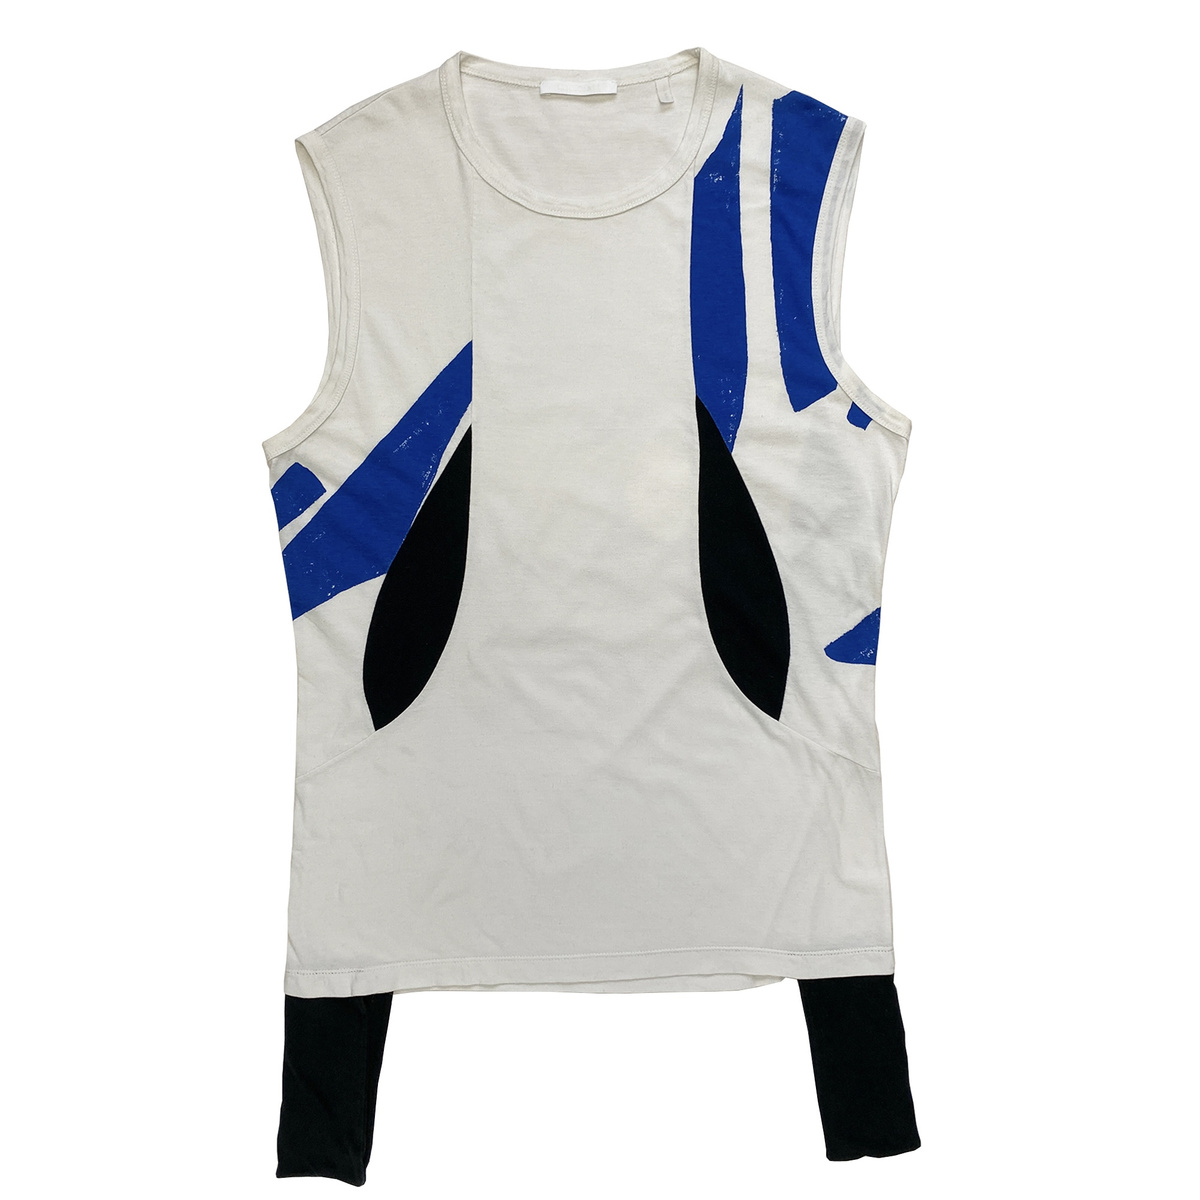 Helmut Lang, S/S 2003 Deconstructed Abstract Print Tank Top - La 